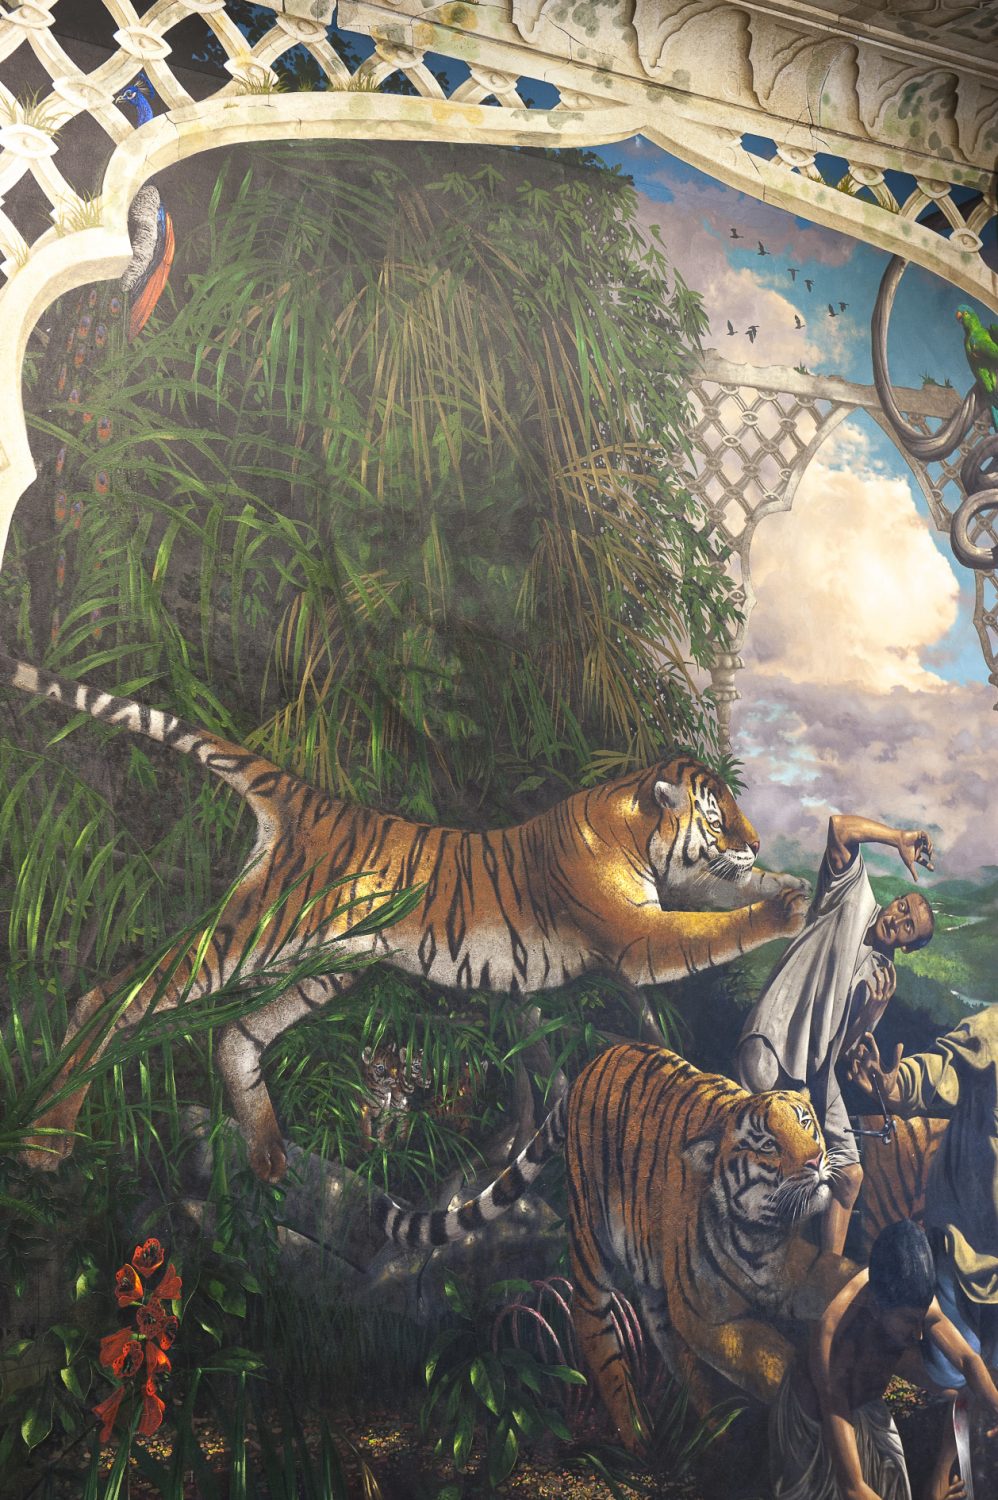 In the Martin Jordan meeting room floor-to-ceiling murals depict scenes of endangered wildlife. Subtly painted to be disguised within foliage, and only visible from certain angles, the face of John Aspinall looms above a tiger defending her young from poachers – a poignant reminder of the plight of some of the world’s most vulnerable species and how they must be protected